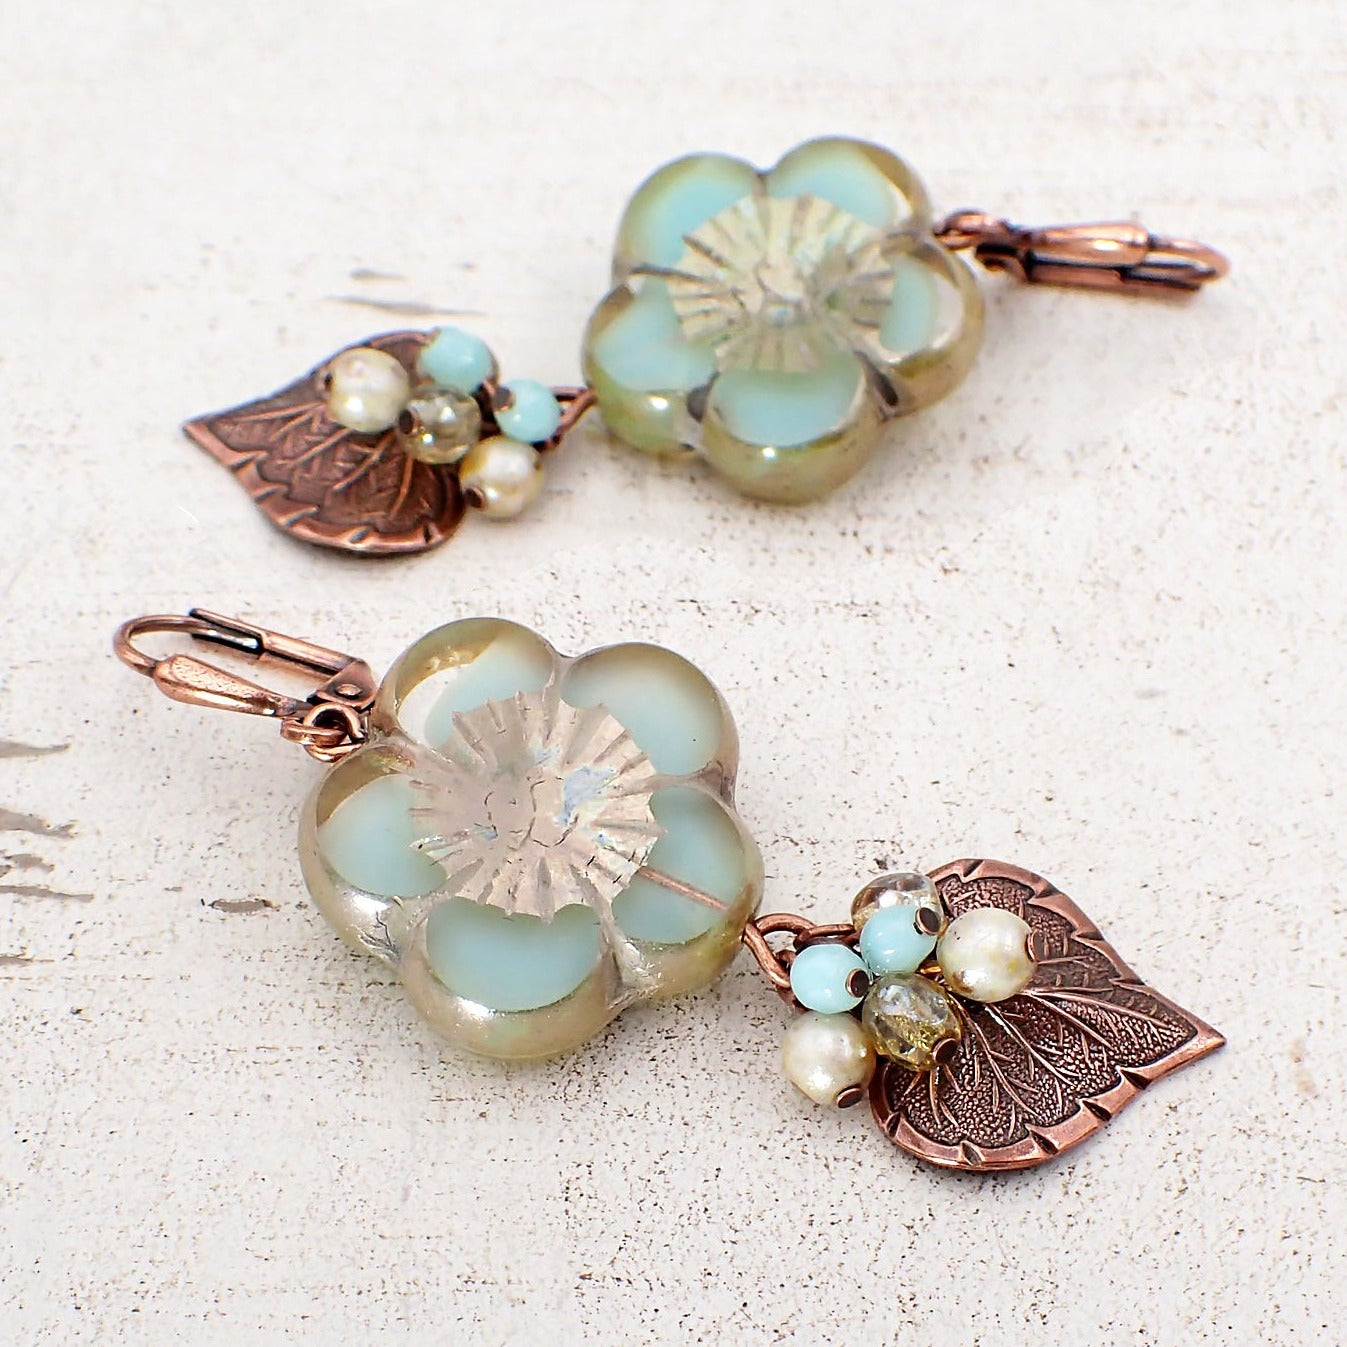 Czech Glass Earrings with Artisan Flower Beads, Mint Green and Champagne with antiqued copper leave charms